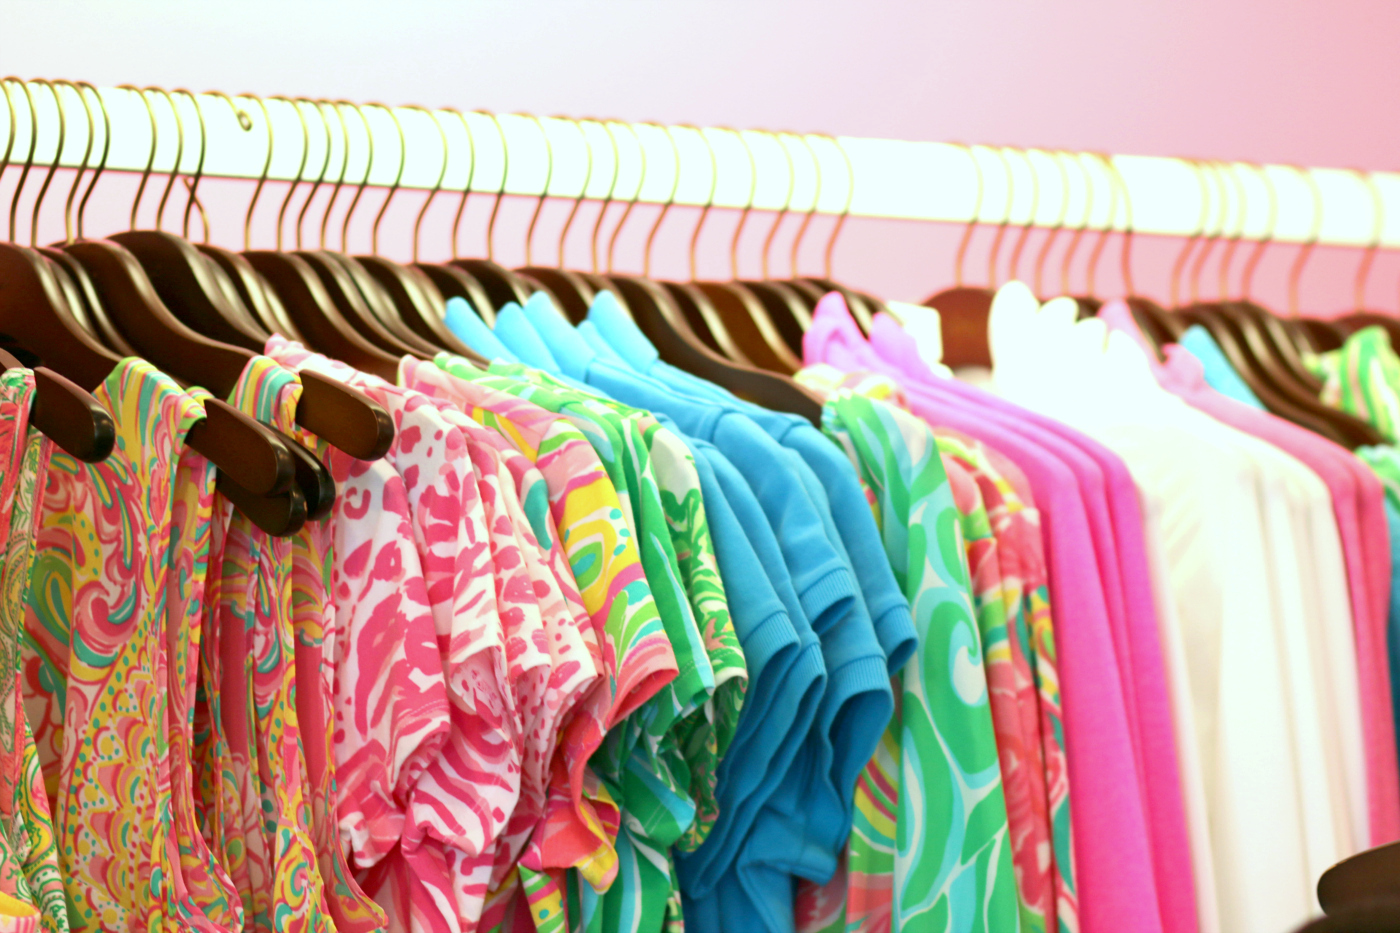 When is the Lilly Pulitzer After Party Sale exactly? This post shares all the most important details about the sale, including the dates, shopping tips, and things to know (like the return policy).